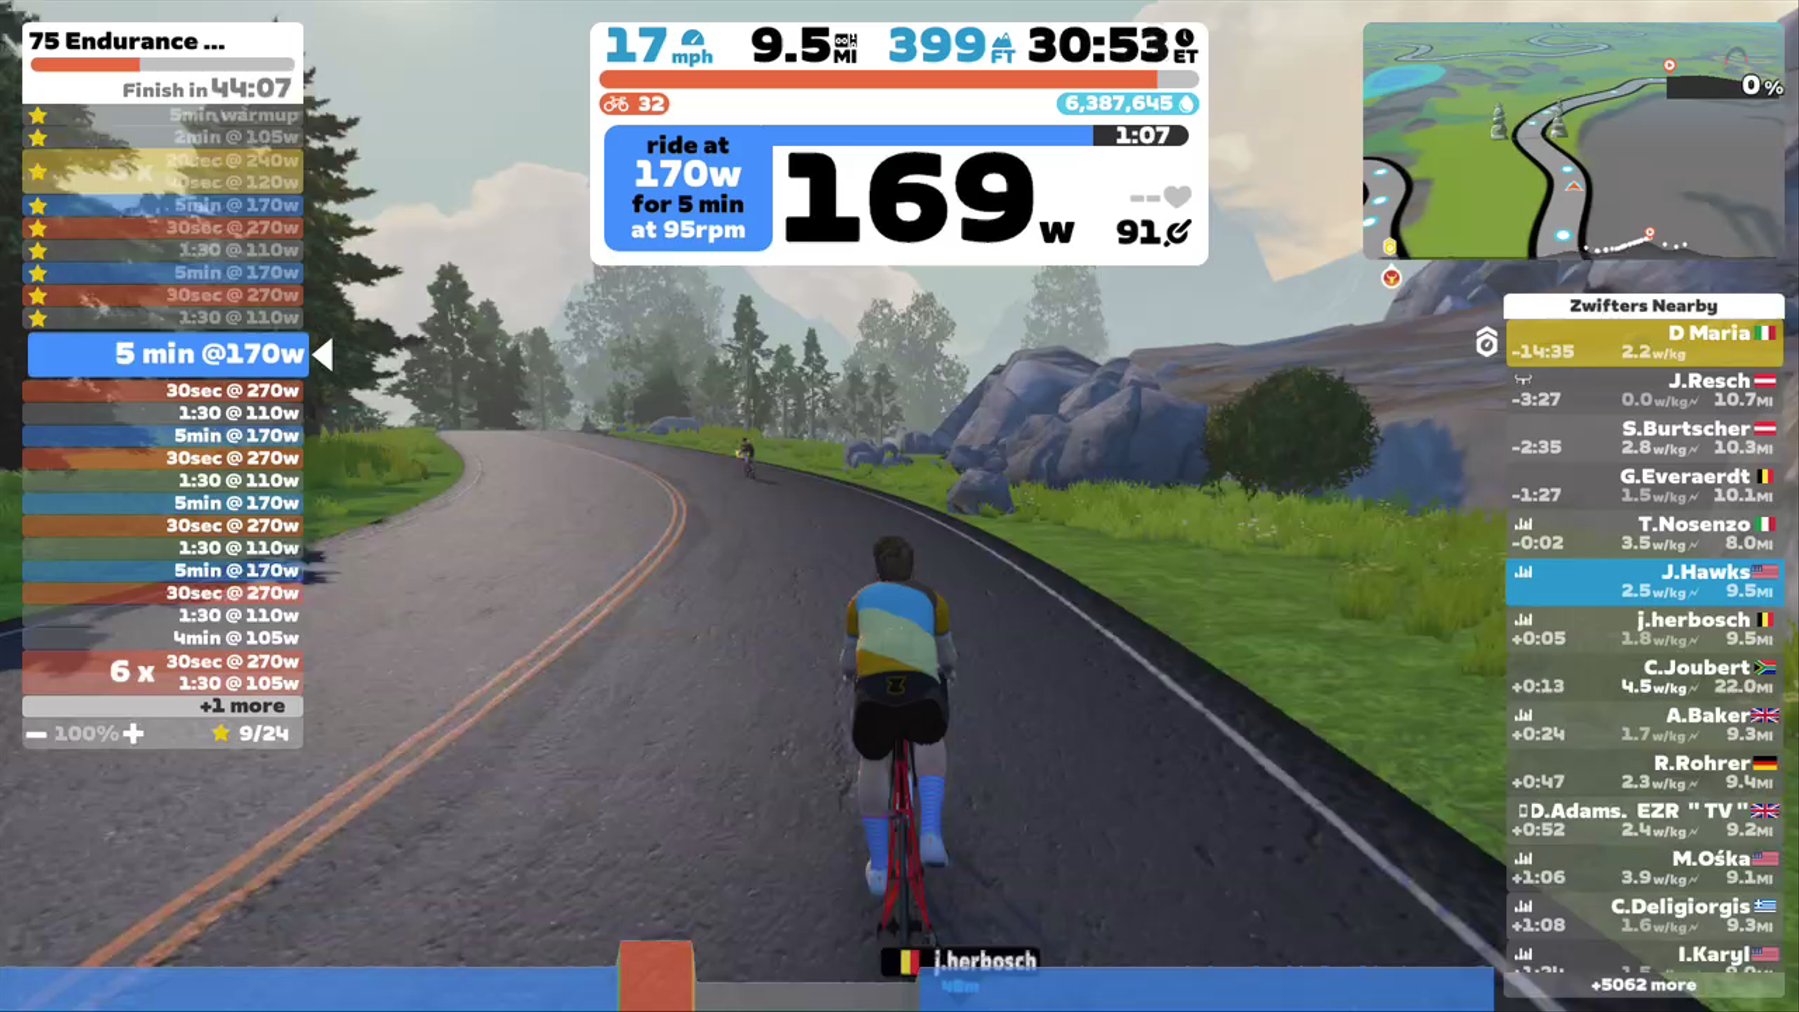 Zwift - 75 Endurance Effort with Surges V2 in Watopia